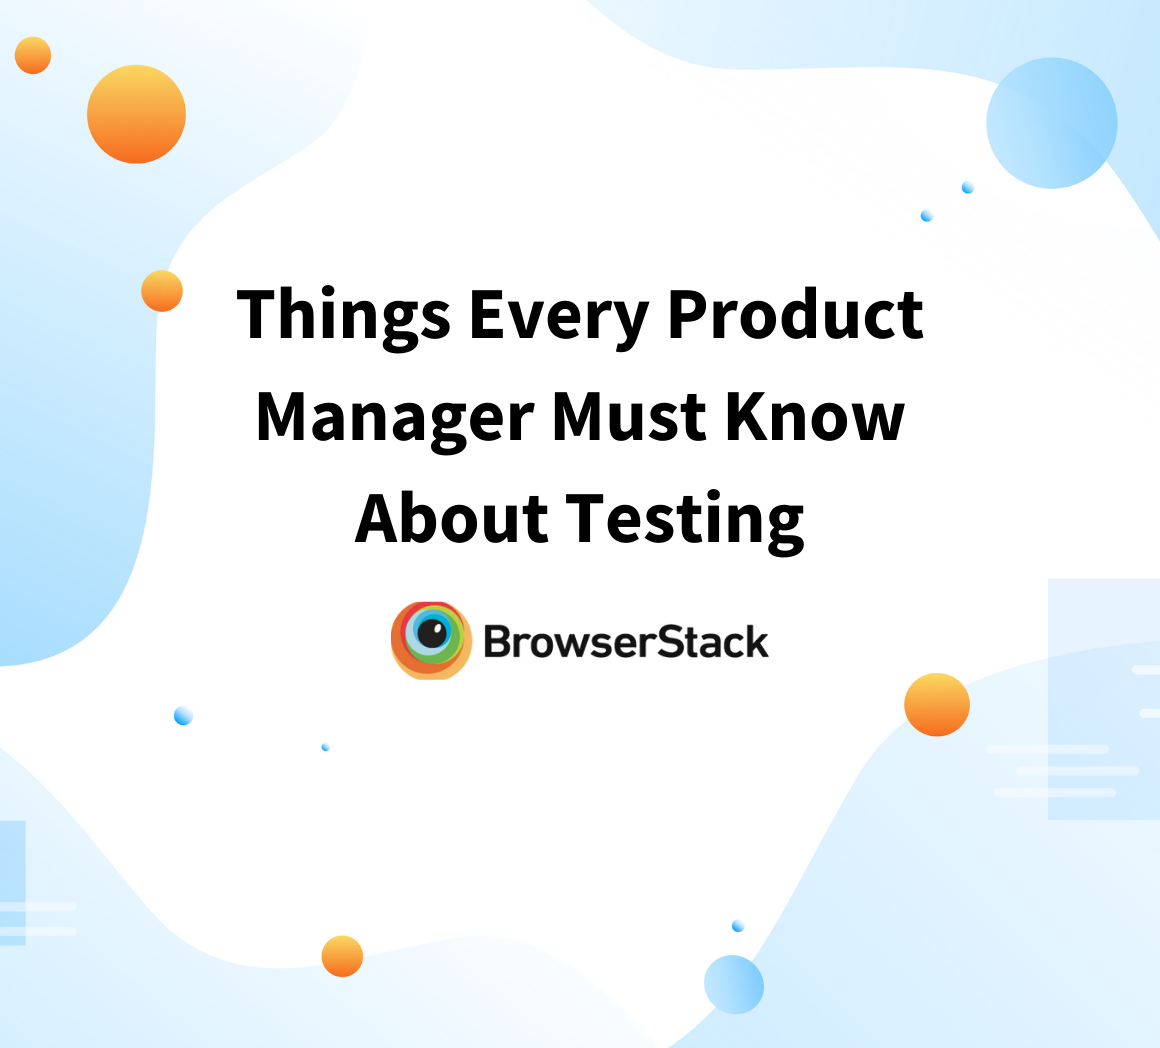 Thing Every Product Manager Must Know About Testing